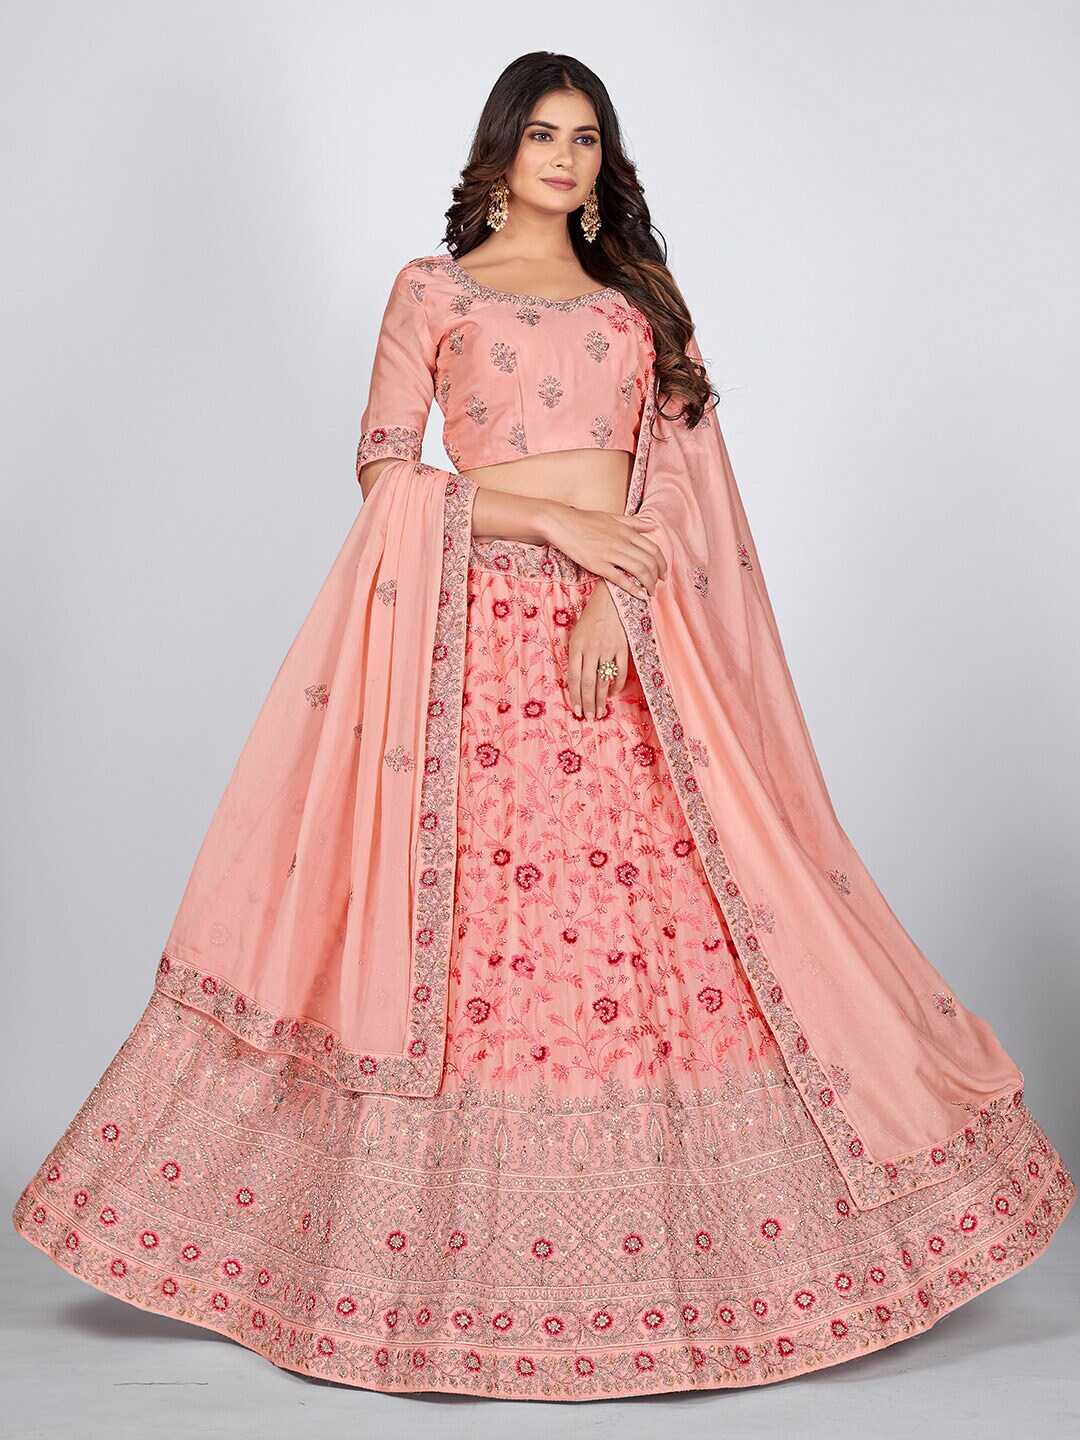 SHOPGARB Peach-Coloured & Red Embellished Beads and Stones Semi-Stitched Lehenga & Unstitched Blouse With Price in India